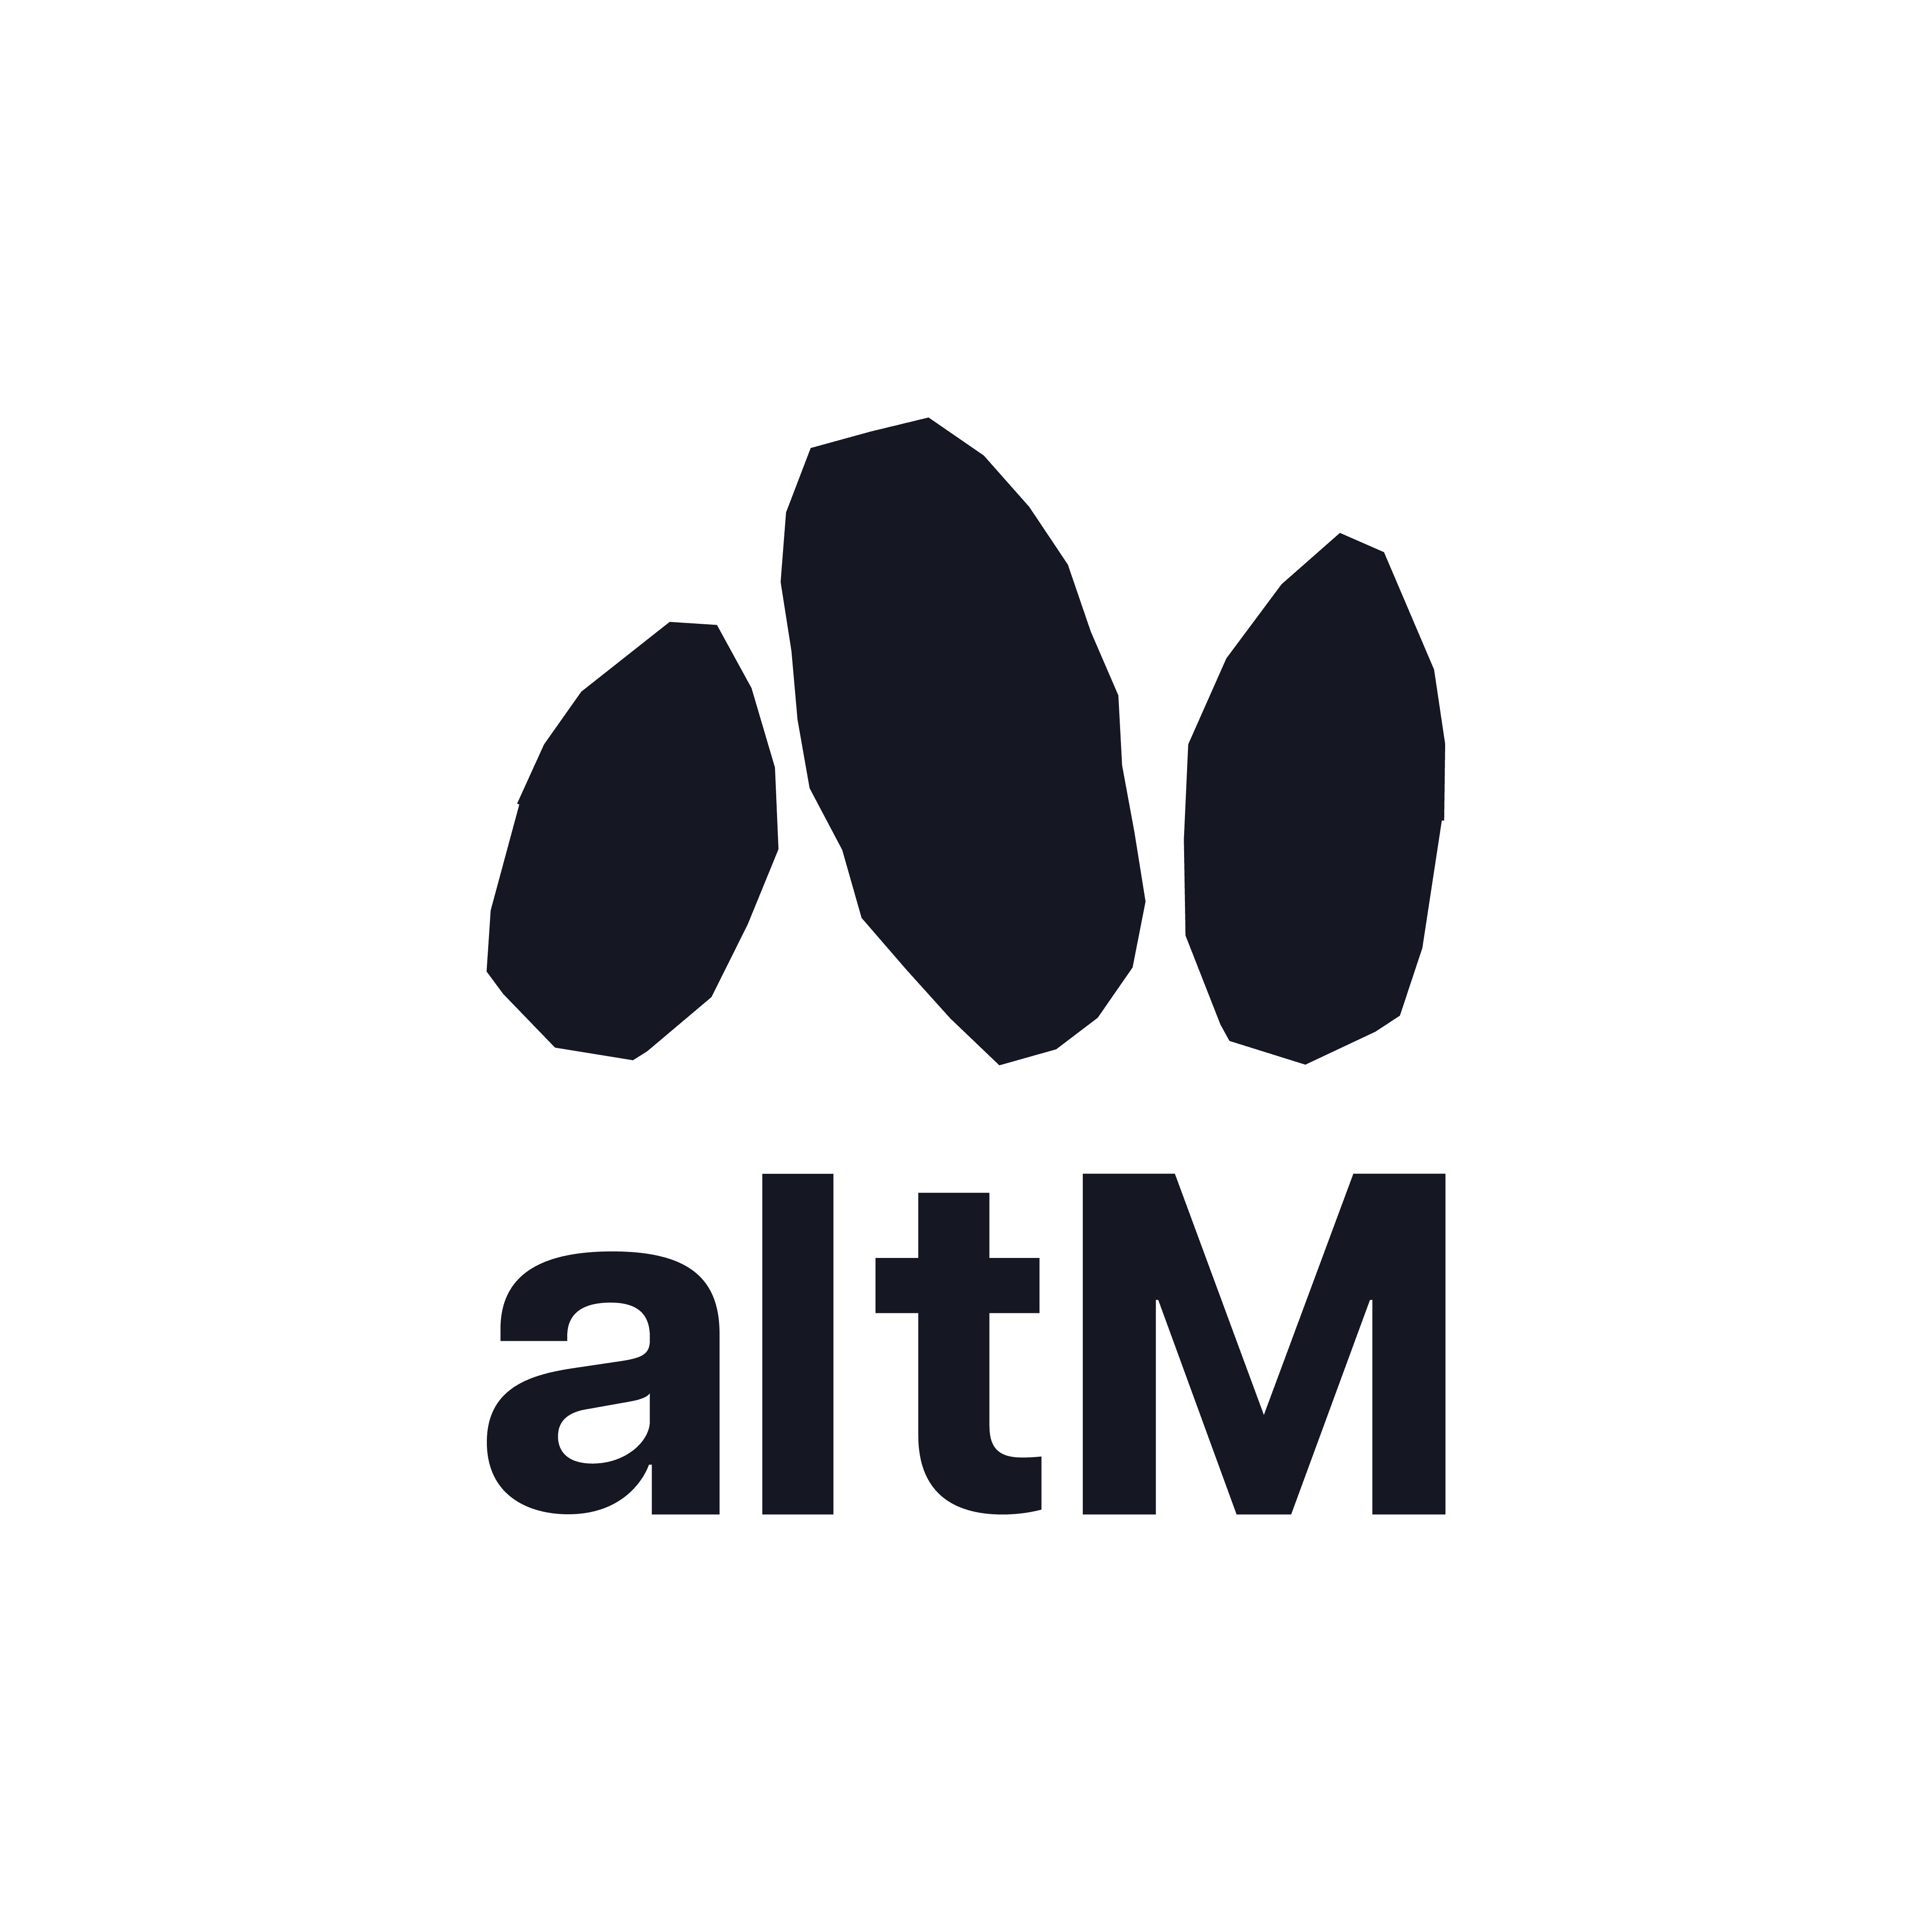 ACT For Environment welcomes altM to its portfolio